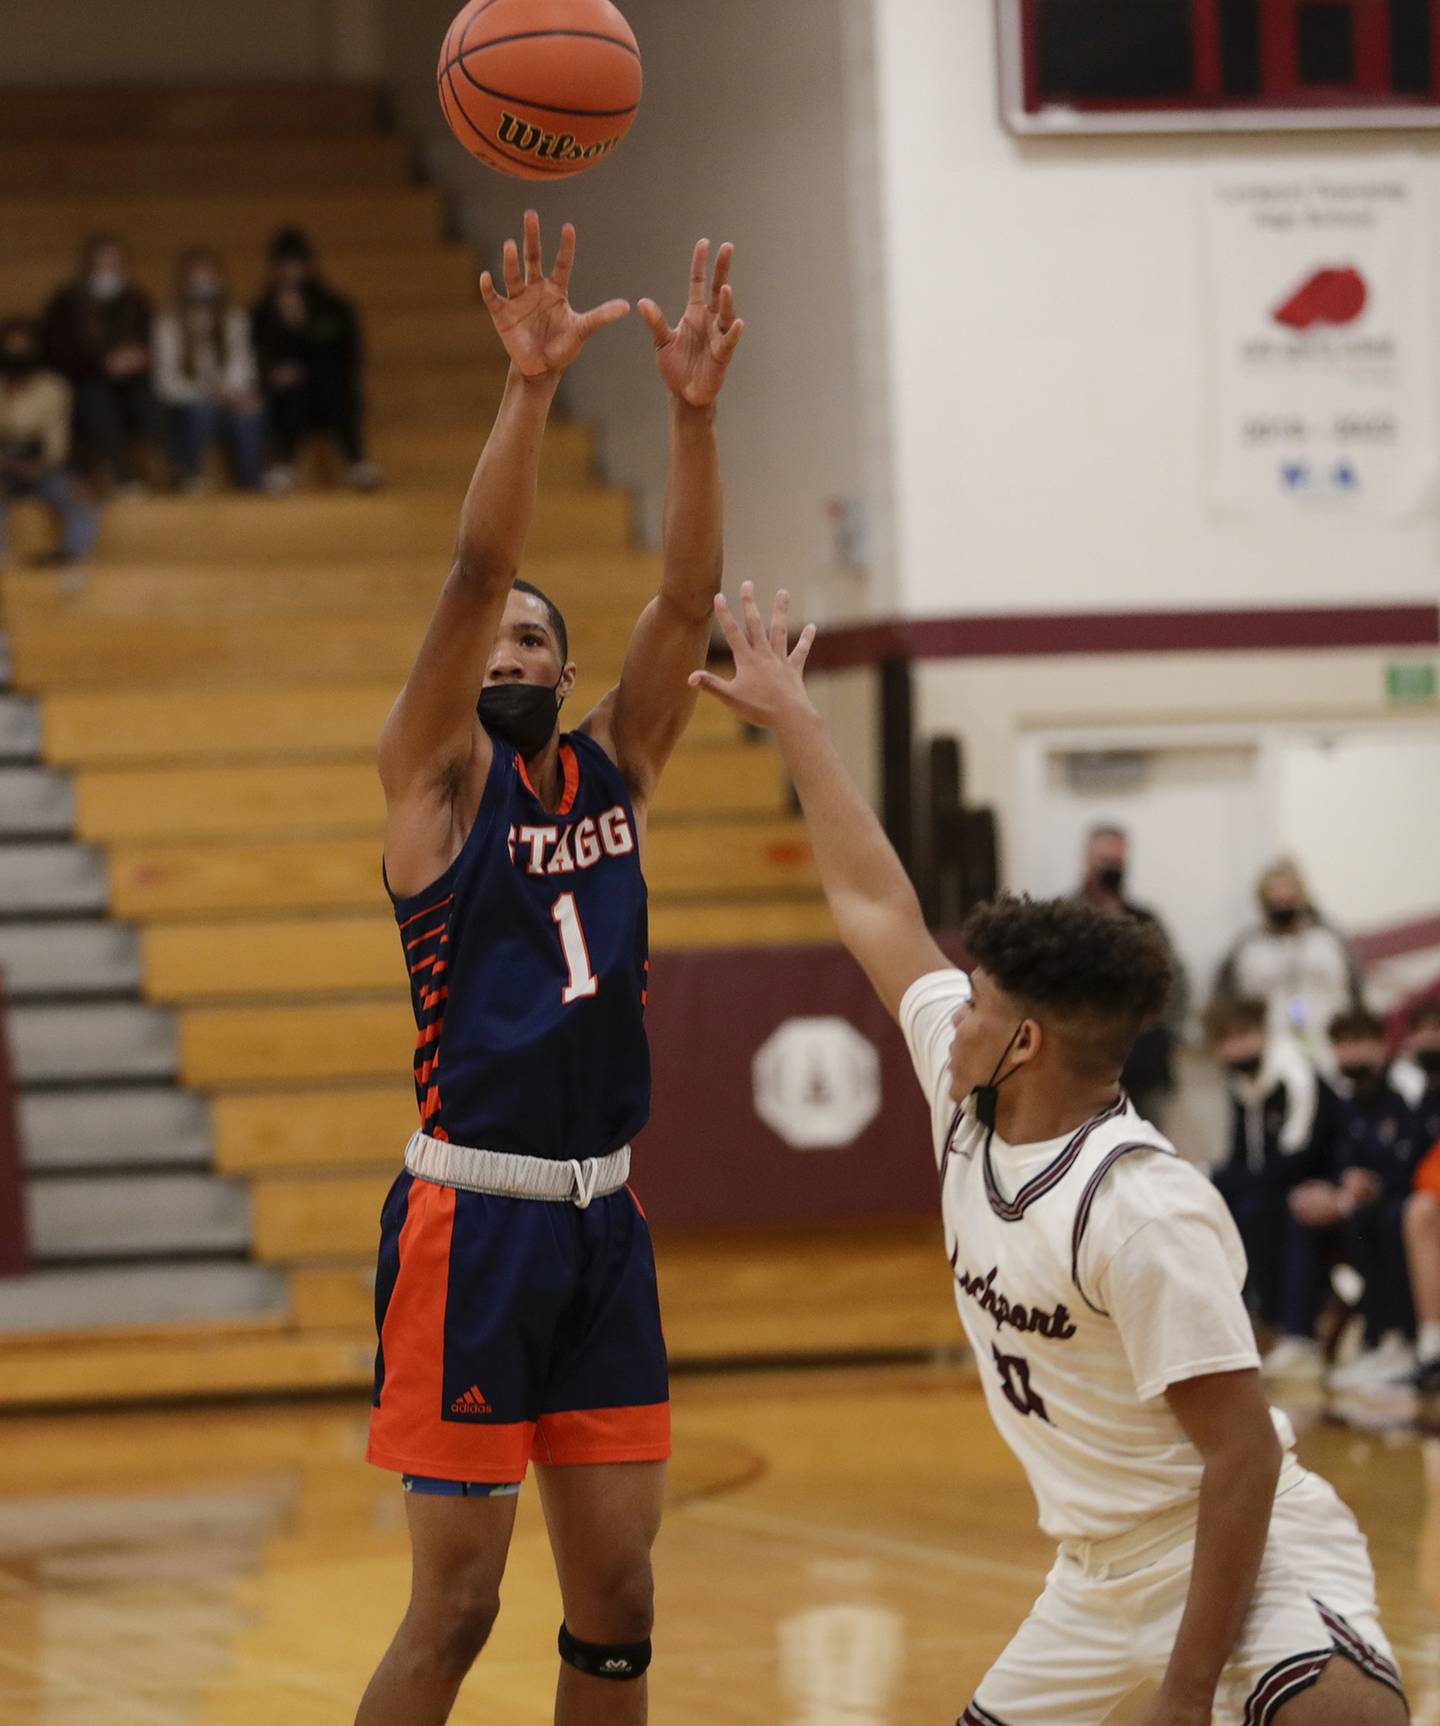 Stagg's Lebarion Gilmore (1) puts up a shot against Lockport's Anthony Munson (11) during a SouthWest Suburban Conference crossover in Lockport on Friday, Jan. 7, 2022.